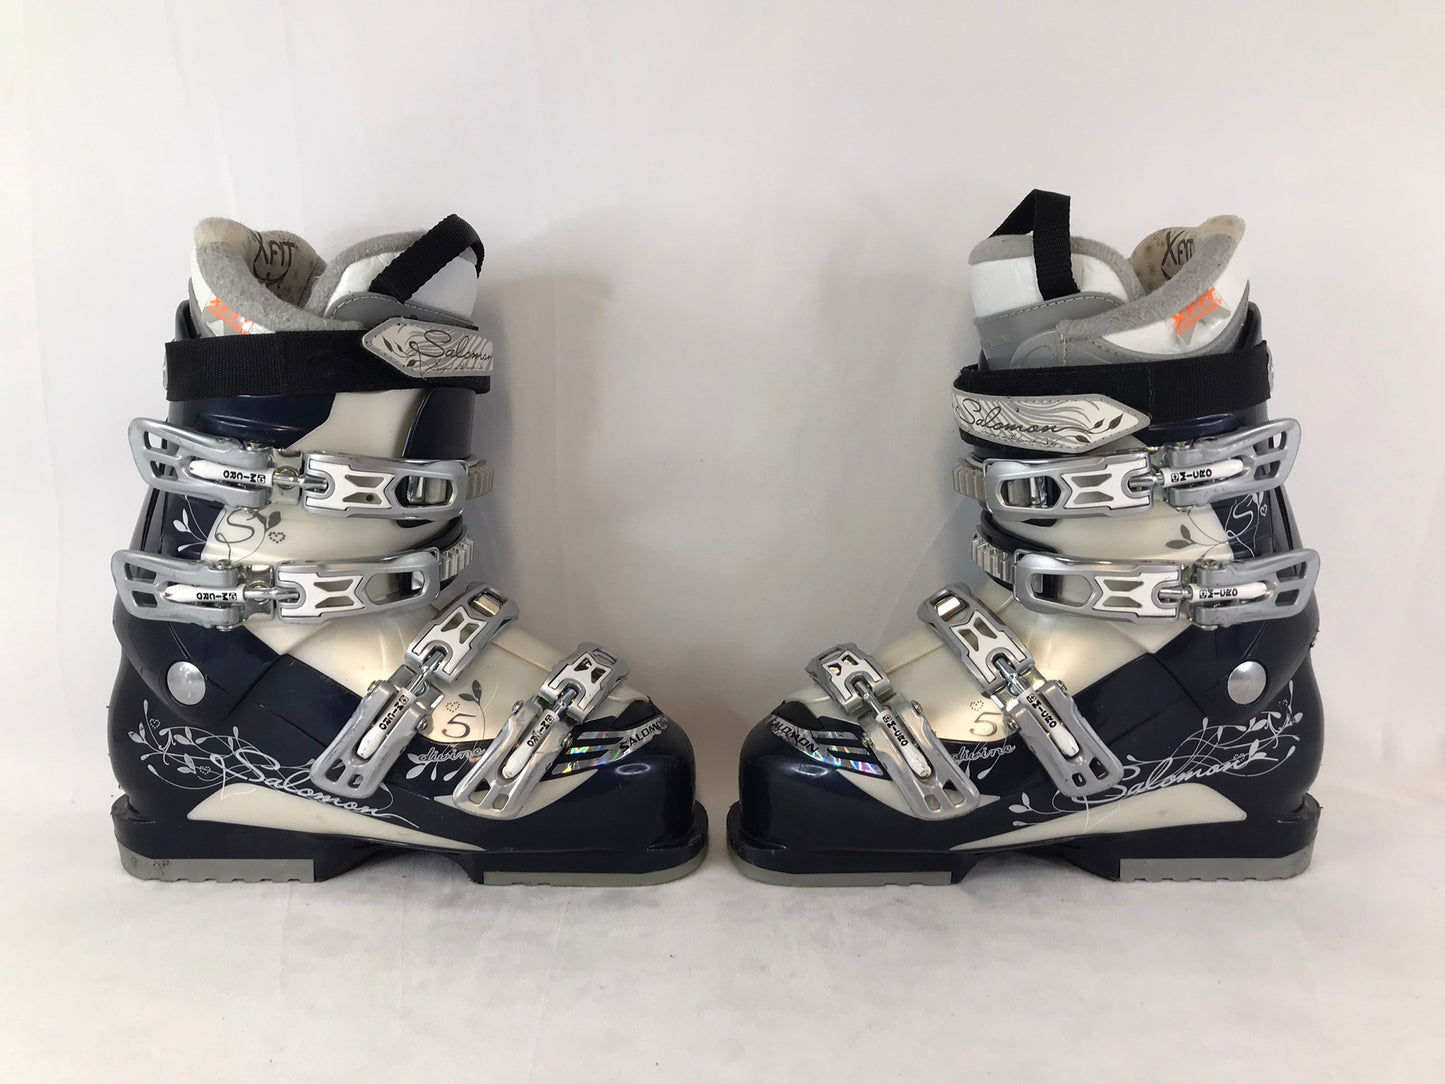 Ski Boots Mondo Size 24.5 Ladies Size 7.5 288 mm Salomon Navy and Oyster Pearl Excellent